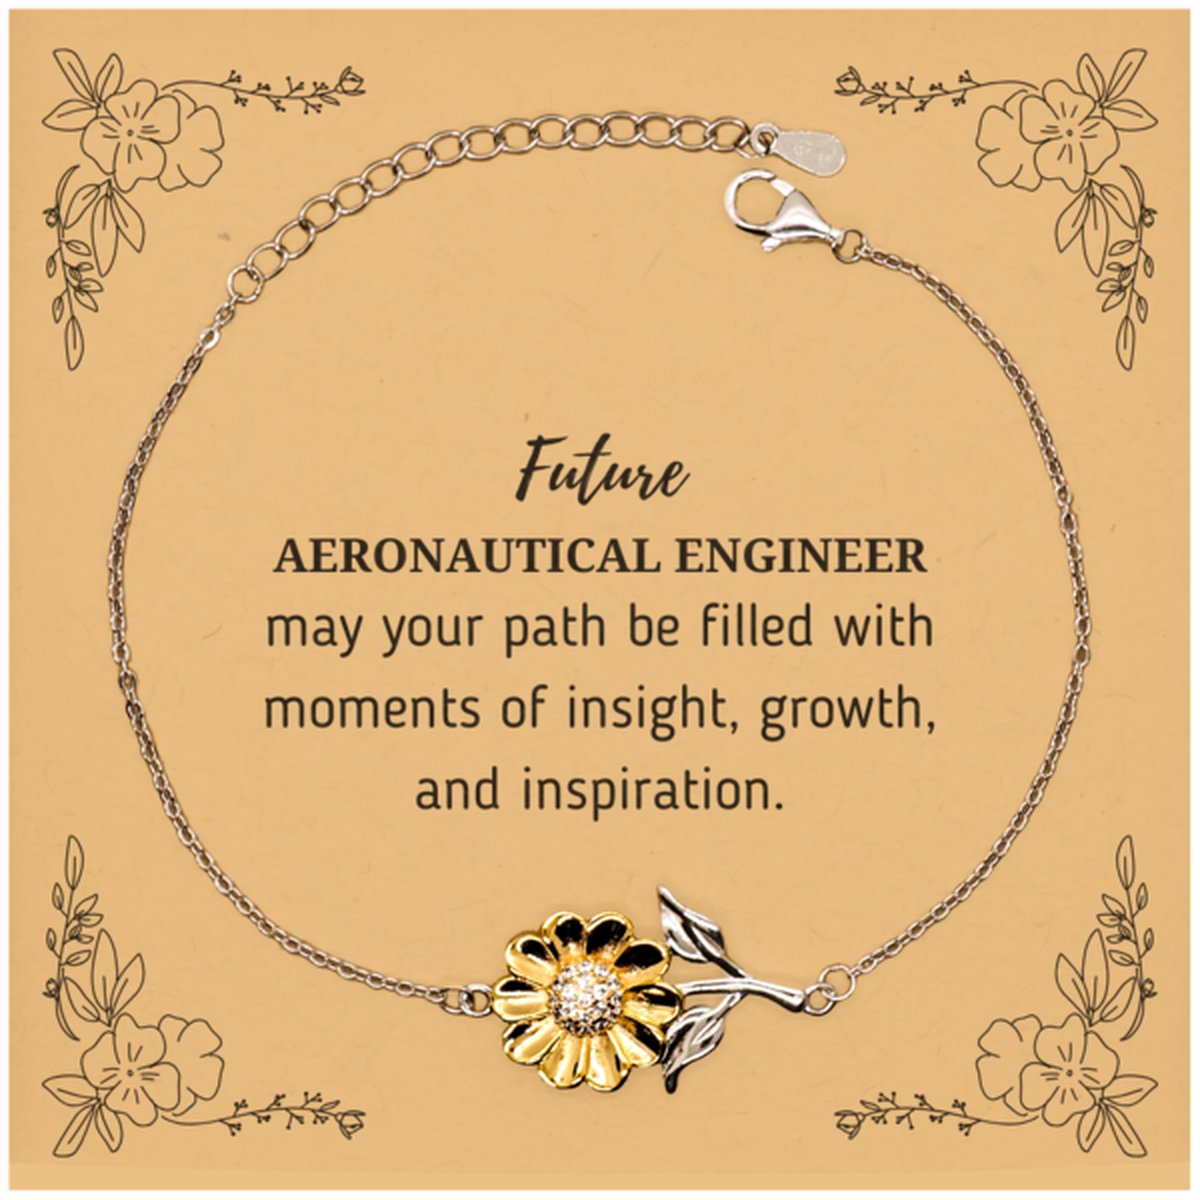 Future Aeronautical Engineer Gifts, May your path be filled with moments of insight, Graduation Gifts for New Aeronautical Engineer, Christmas Unique Sunflower Bracelet For Men, Women, Friends